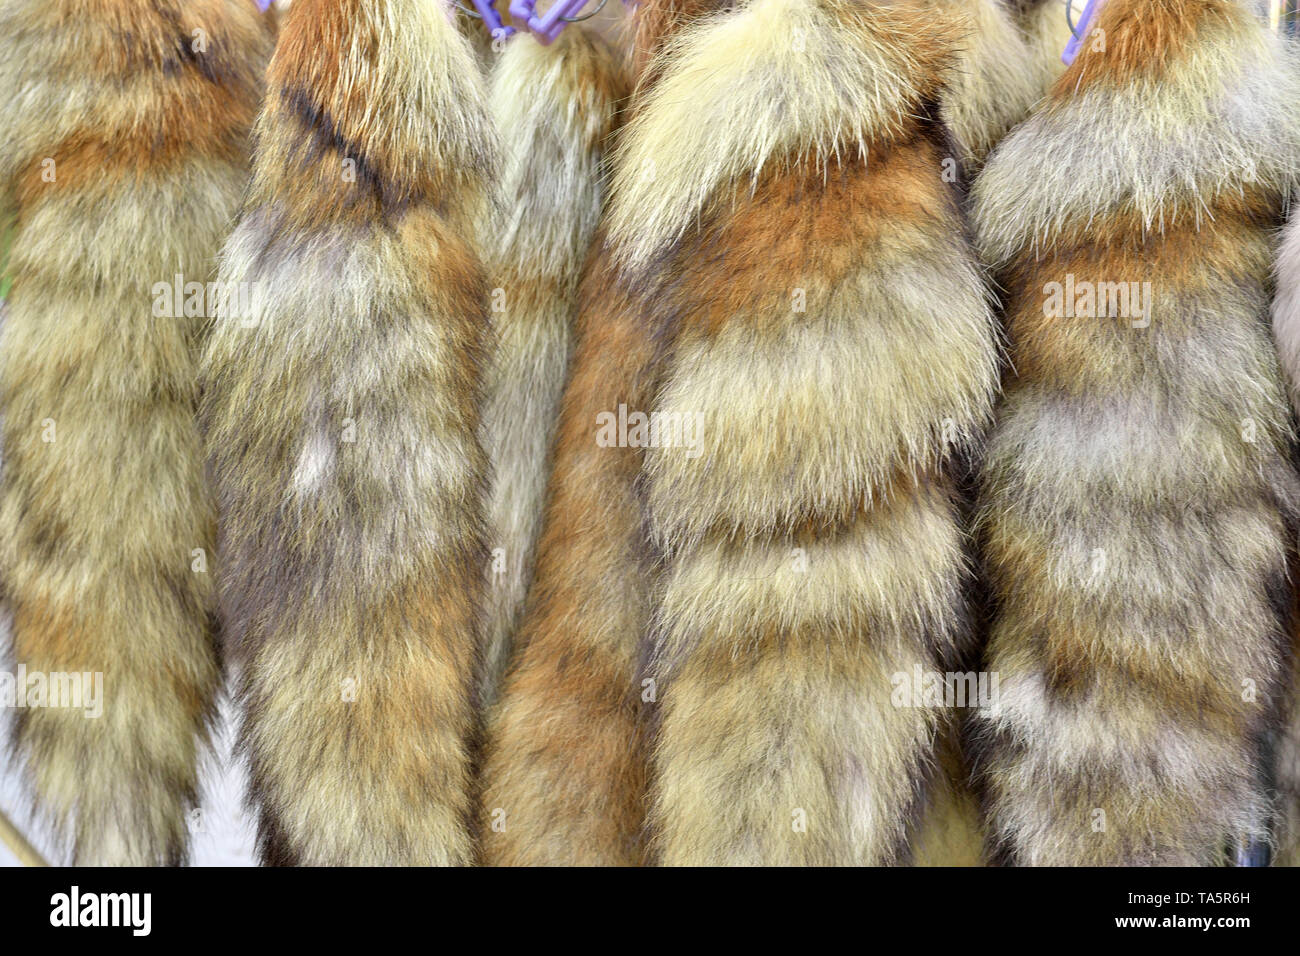 Tails of gray foxes on a collar hang on ropes on clothespins close-up Stock Photo